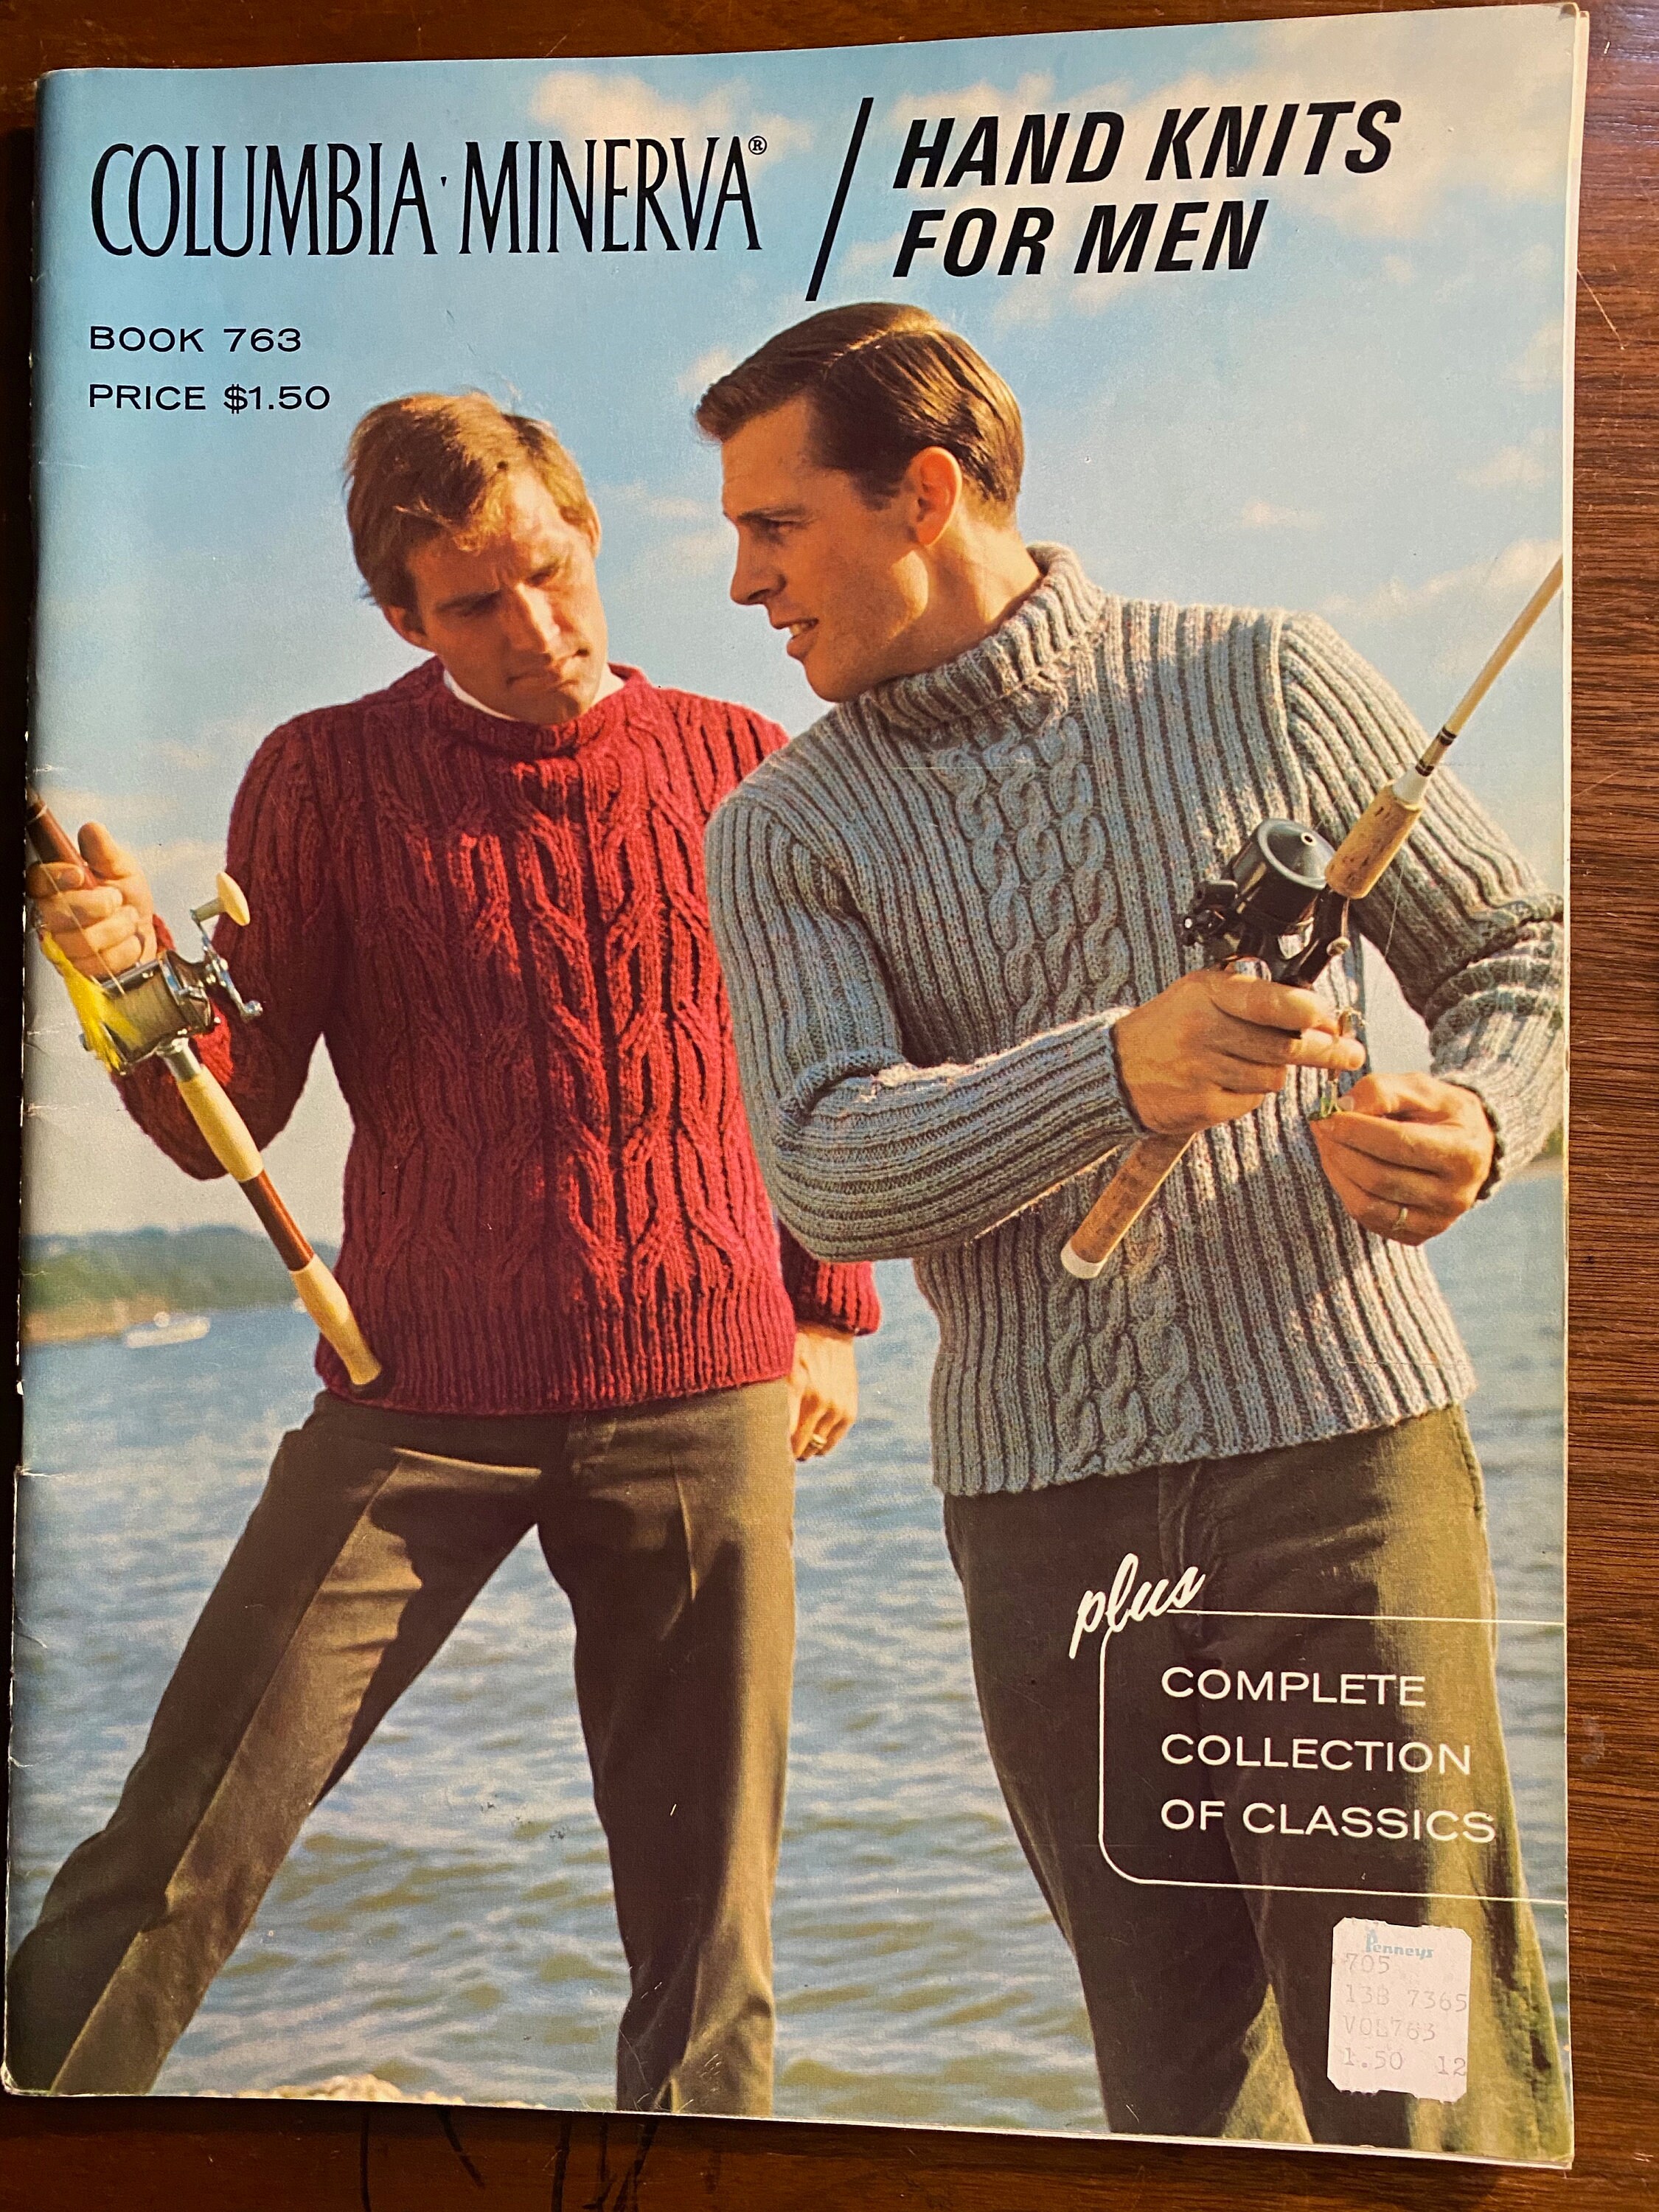 Buy Hand Knits for Men Vests & Sweaters Columbia Minerva Book 763